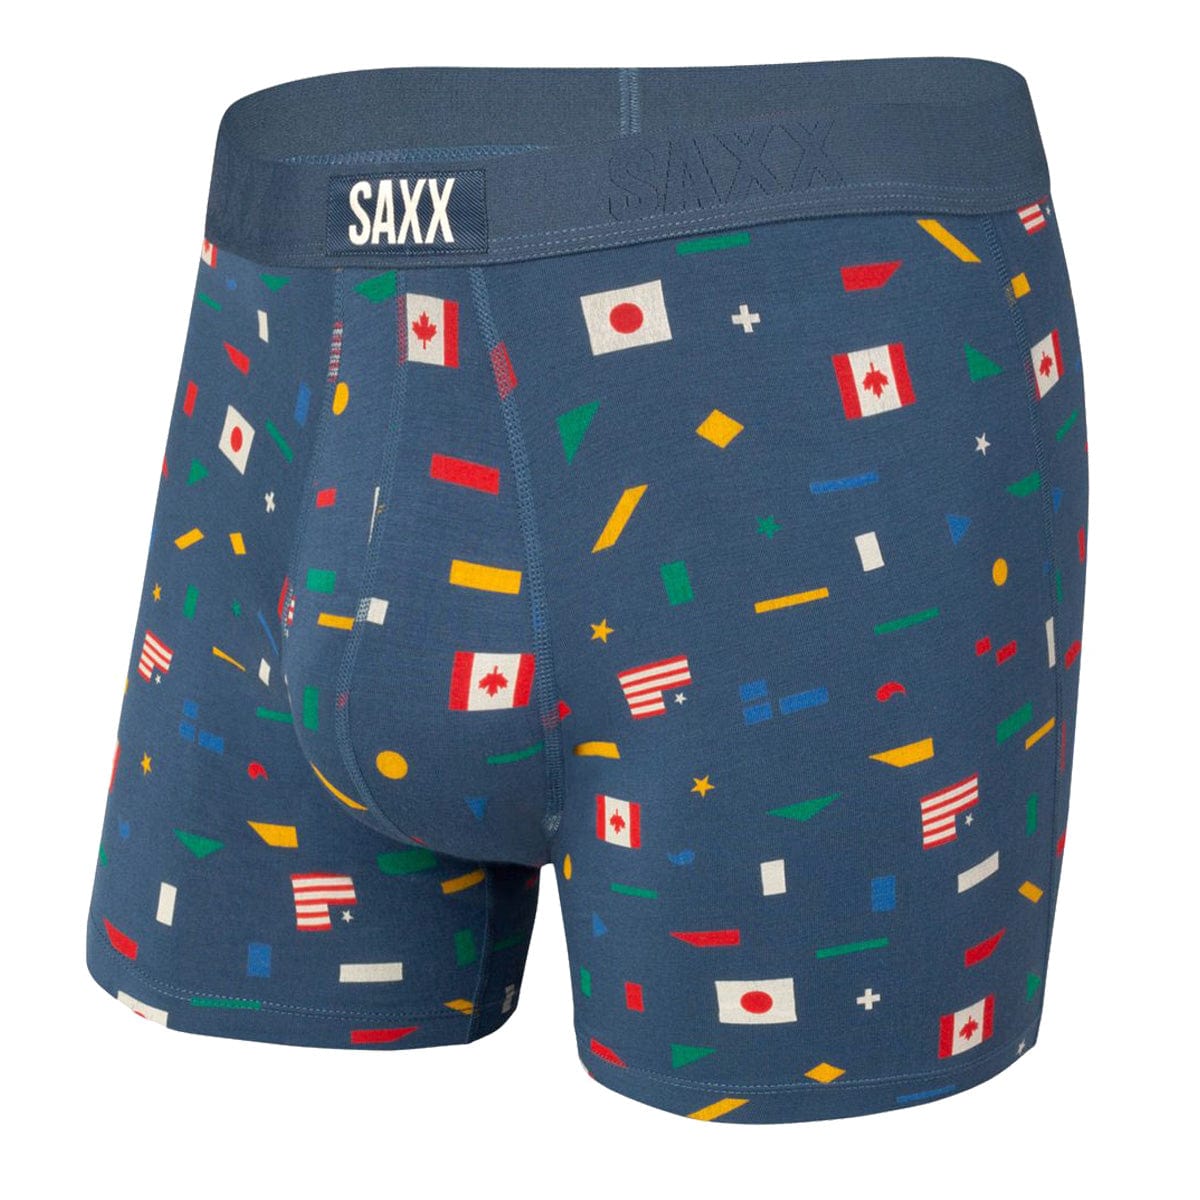 Saxx Vibe Boxers - Denim Unity - The Hockey Shop Source For Sports